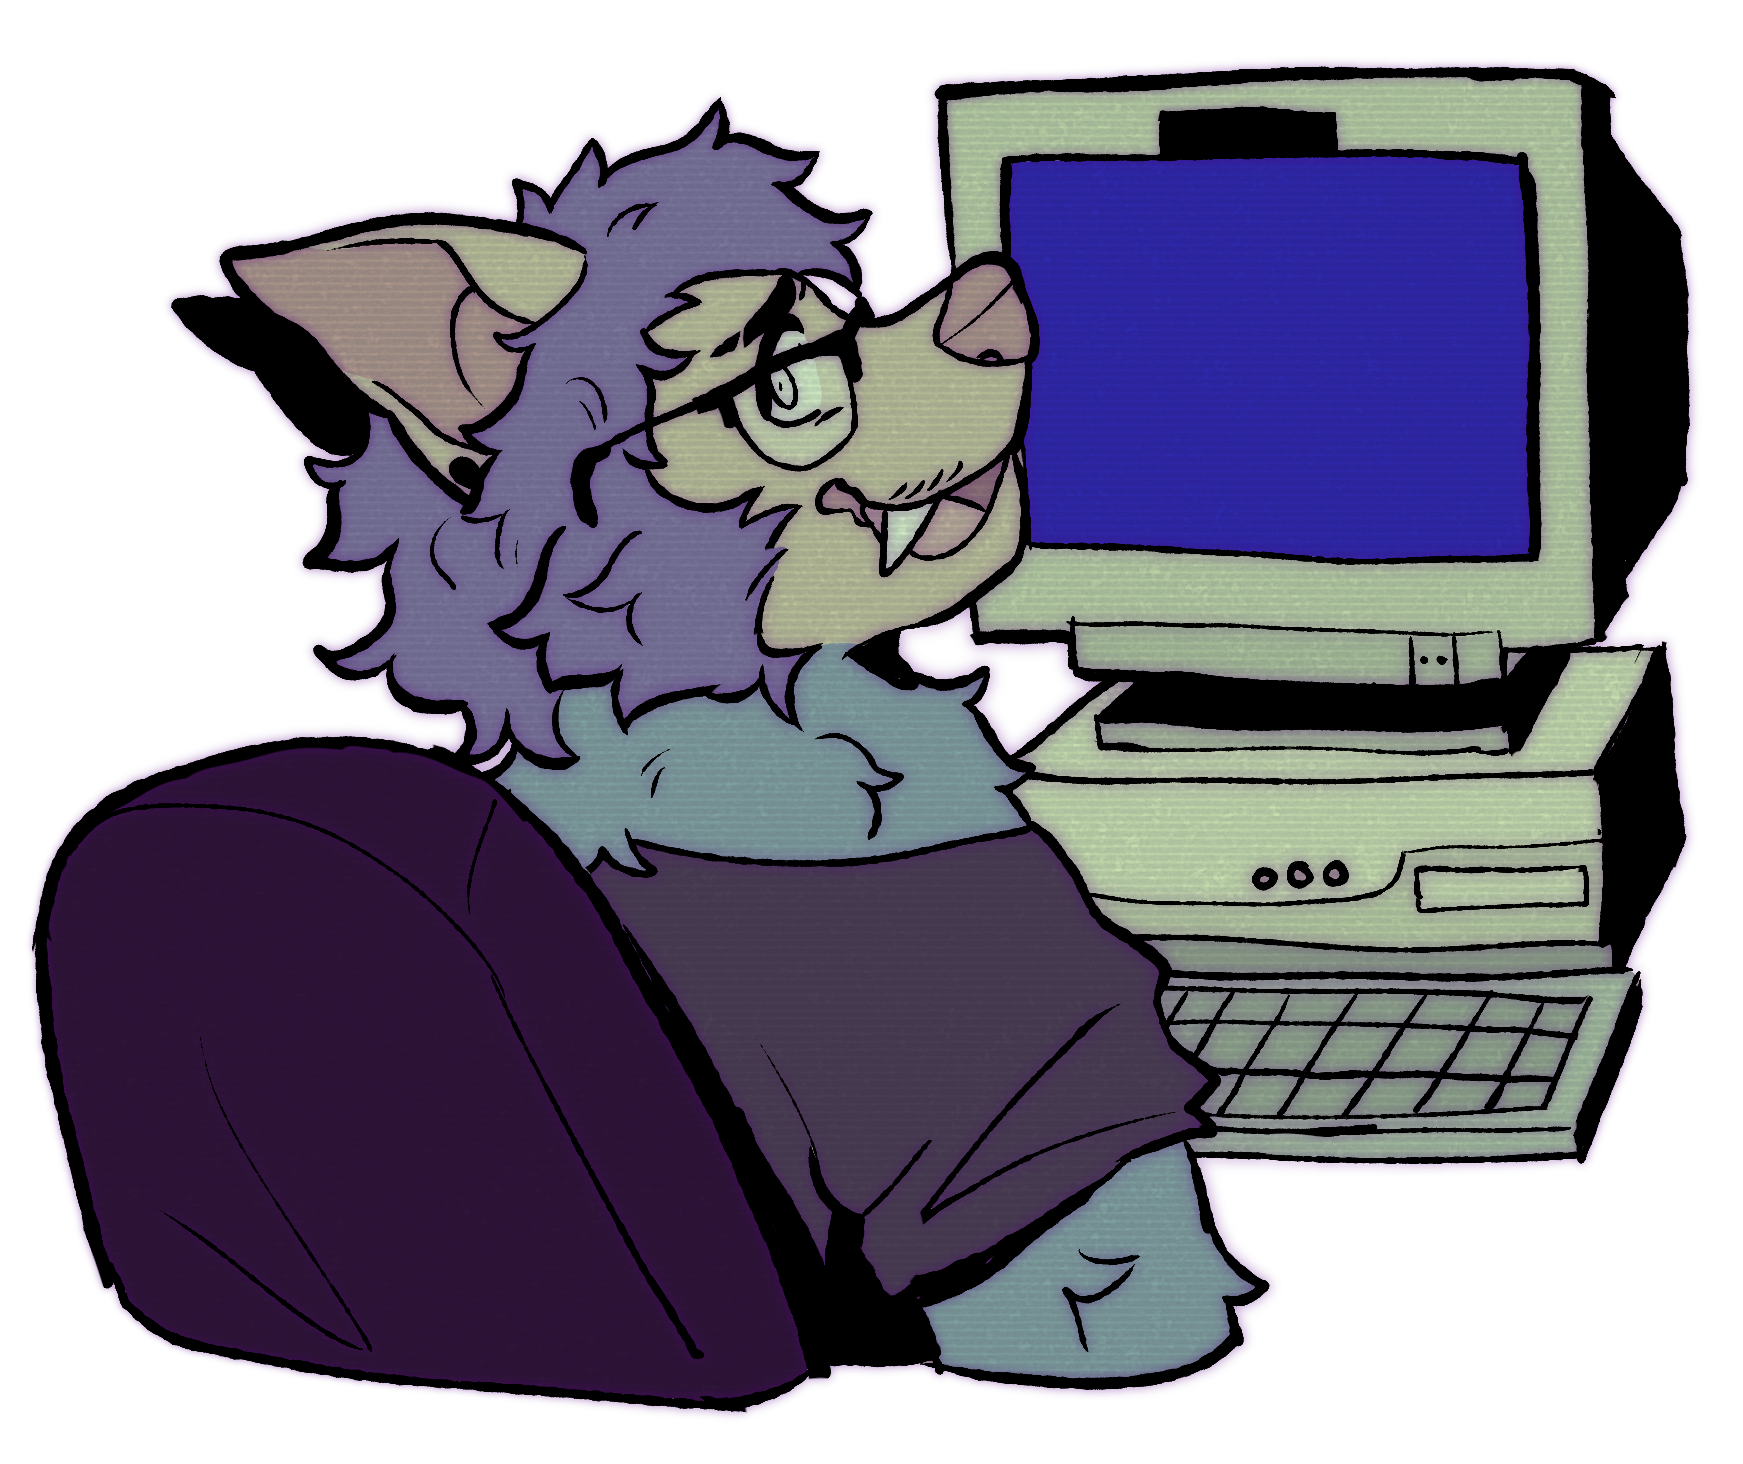 Drawn art of my fursona sitting infront of an old CRT computer monitor looking backwards at the camera with a nervous smile.